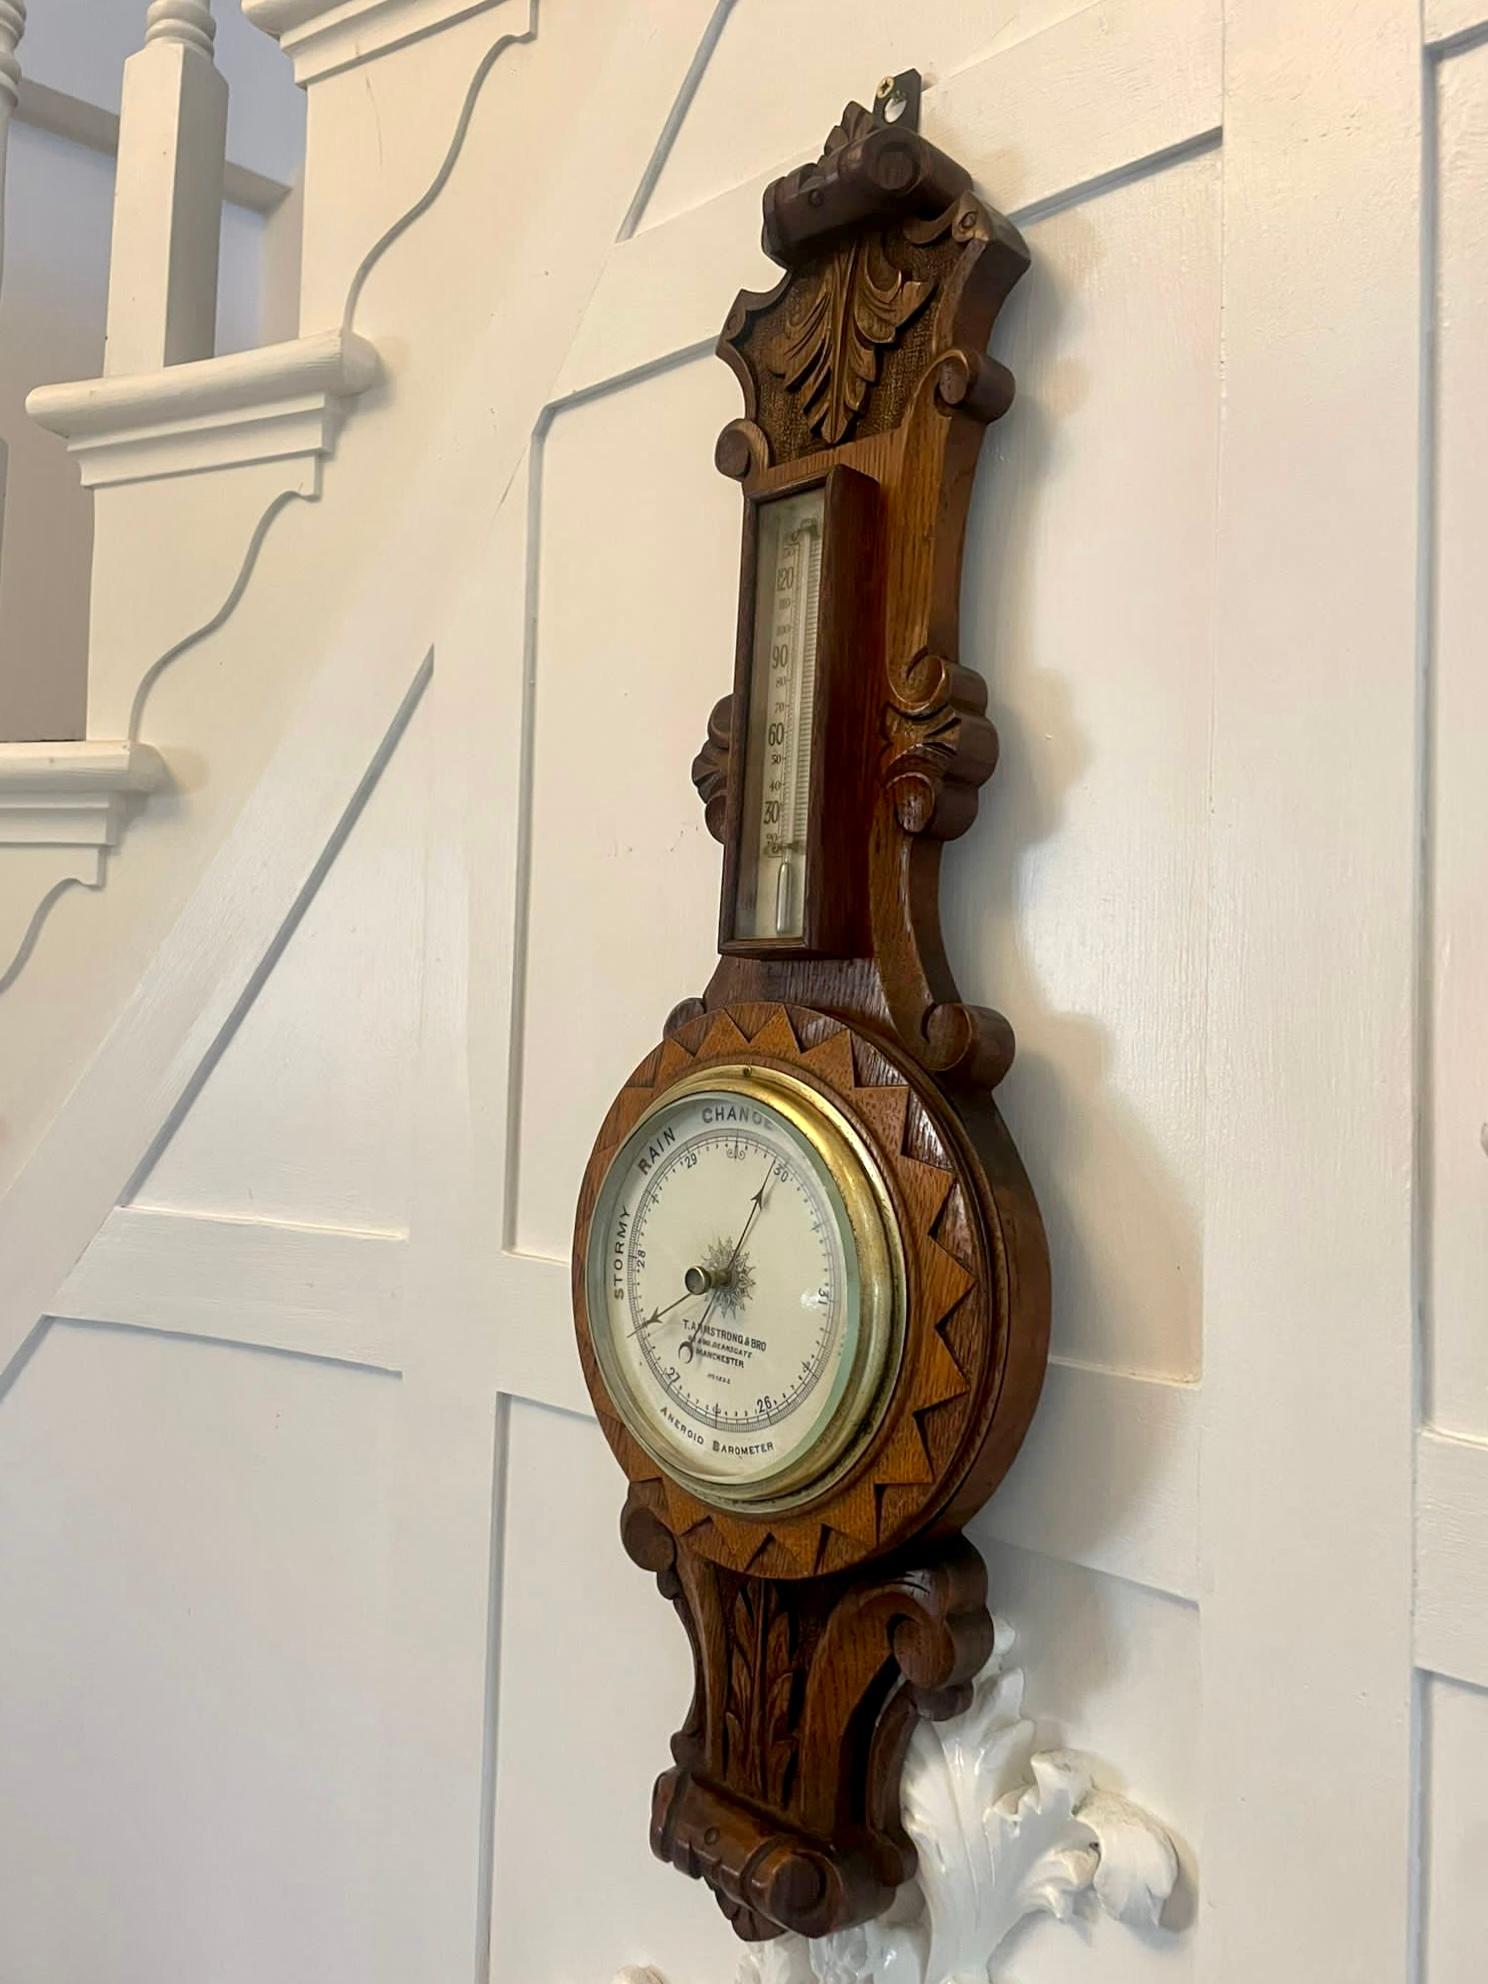 Antique Victorian quality carved oak aneroid banjo barometer having a quality carved oak shaped case with a brass bezel porcelain dial with original hands and a thermometer


In lovely original condition and good working order


Dimensions:
Height